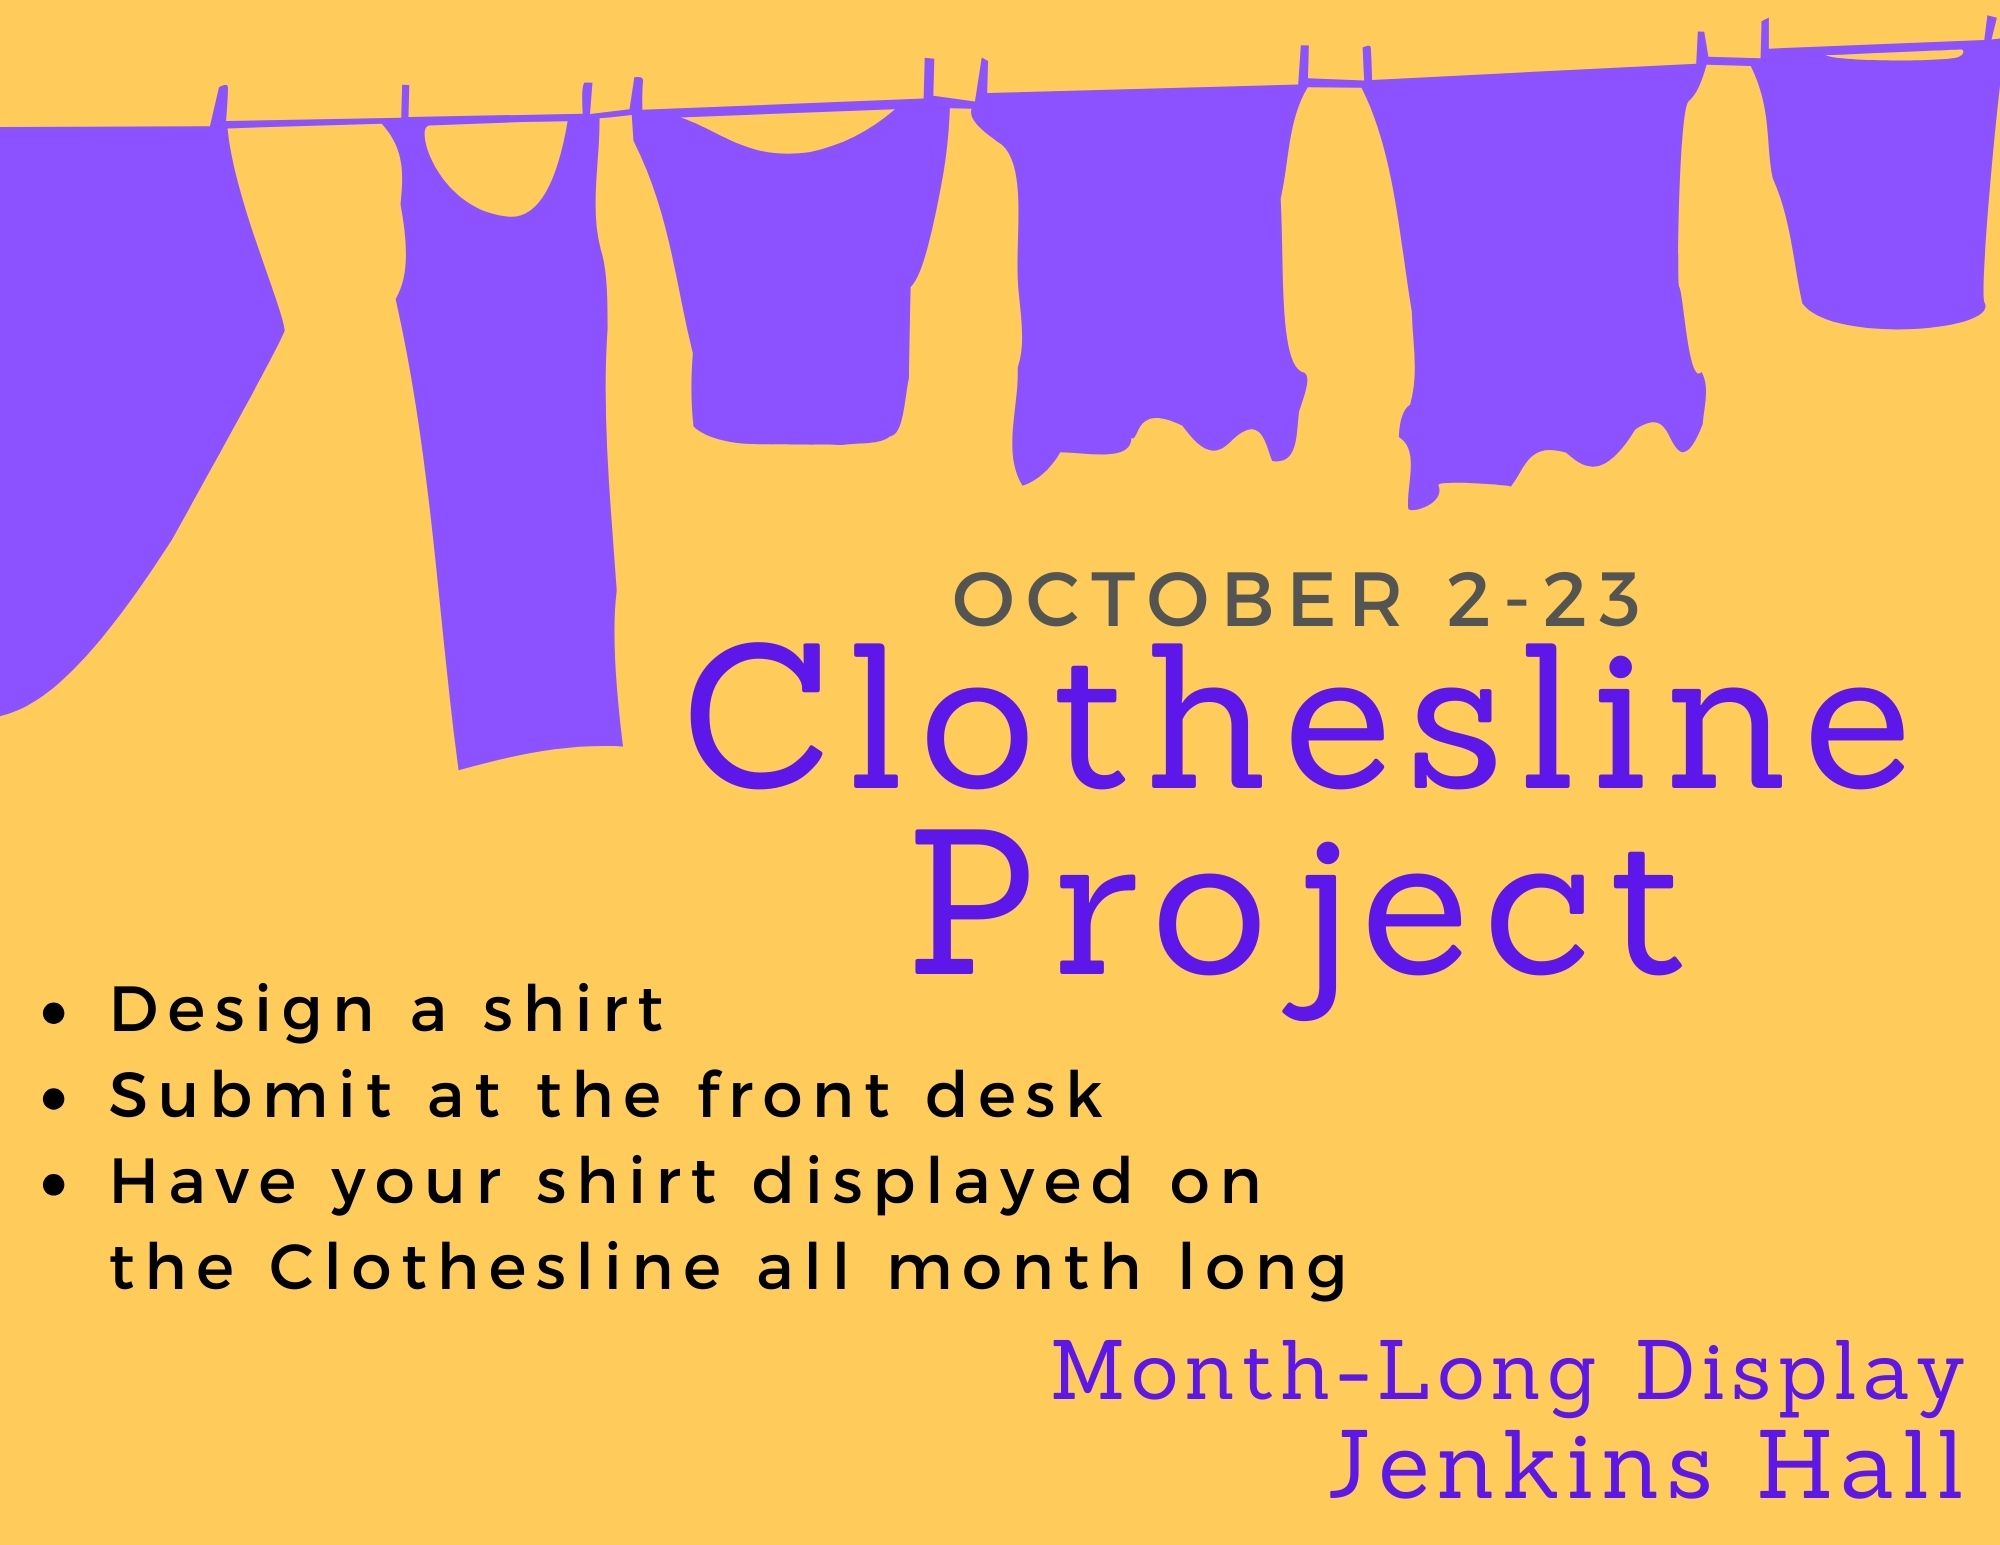 Clothesline Project flyer